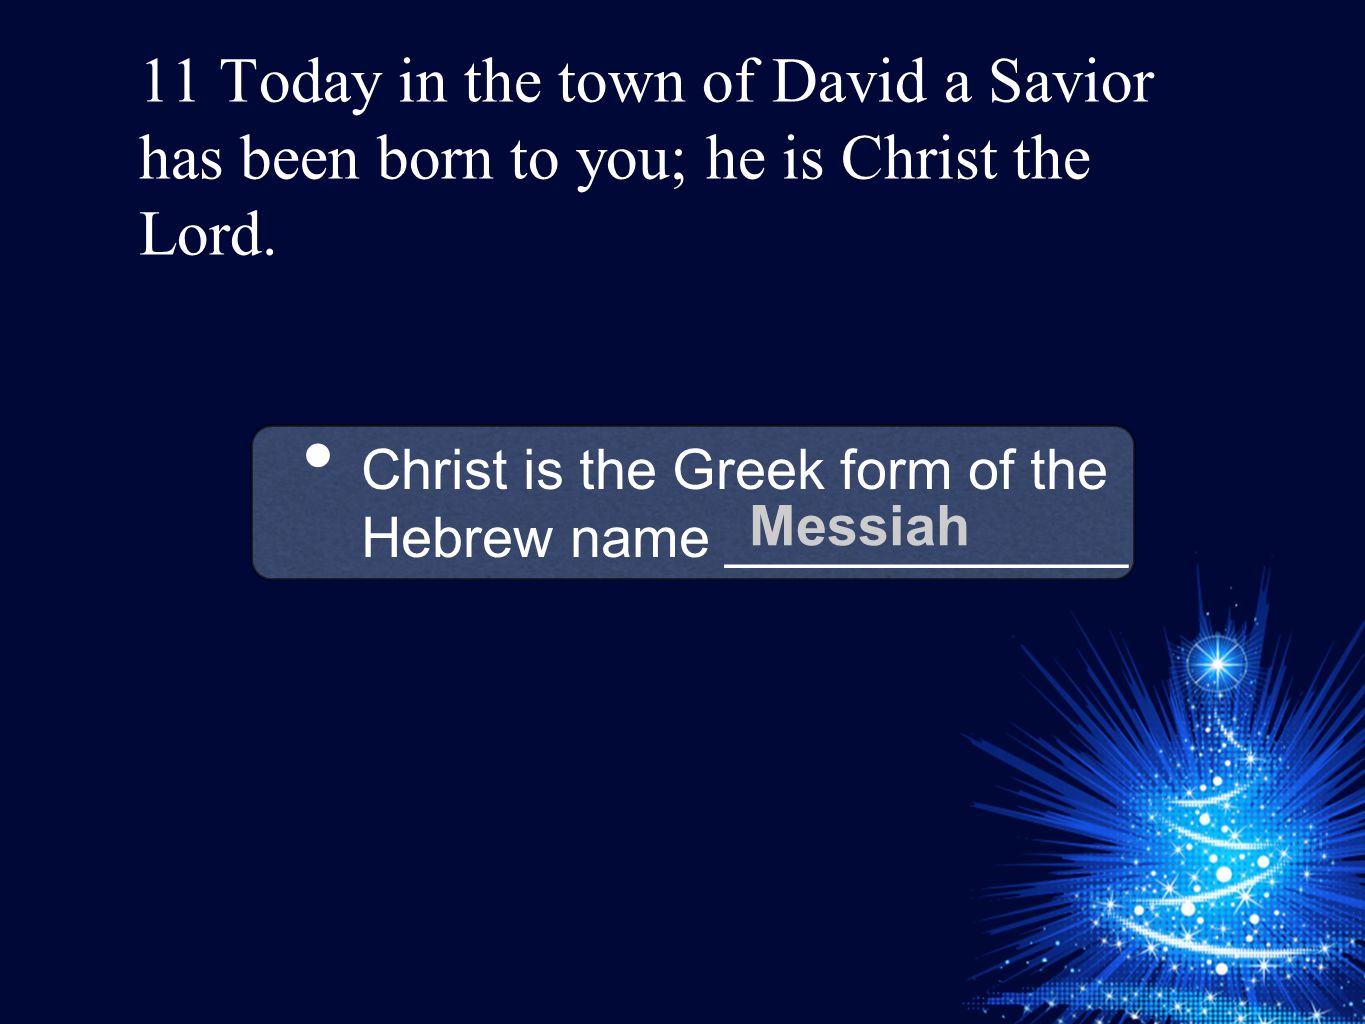 11 Today in the town of David a Savior has been born to you; he is Christ the Lord.